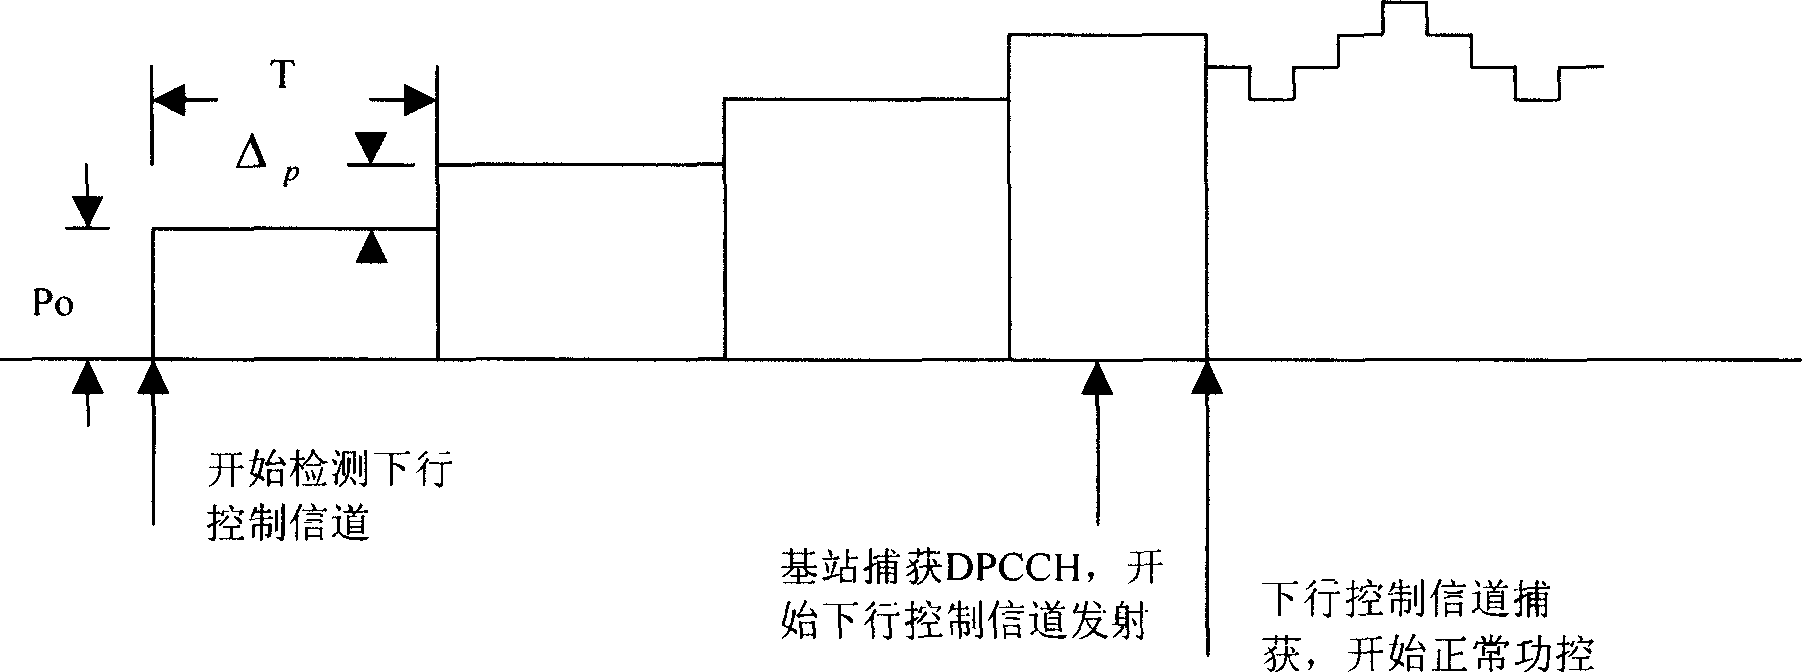 Method for carrying out power control on user device